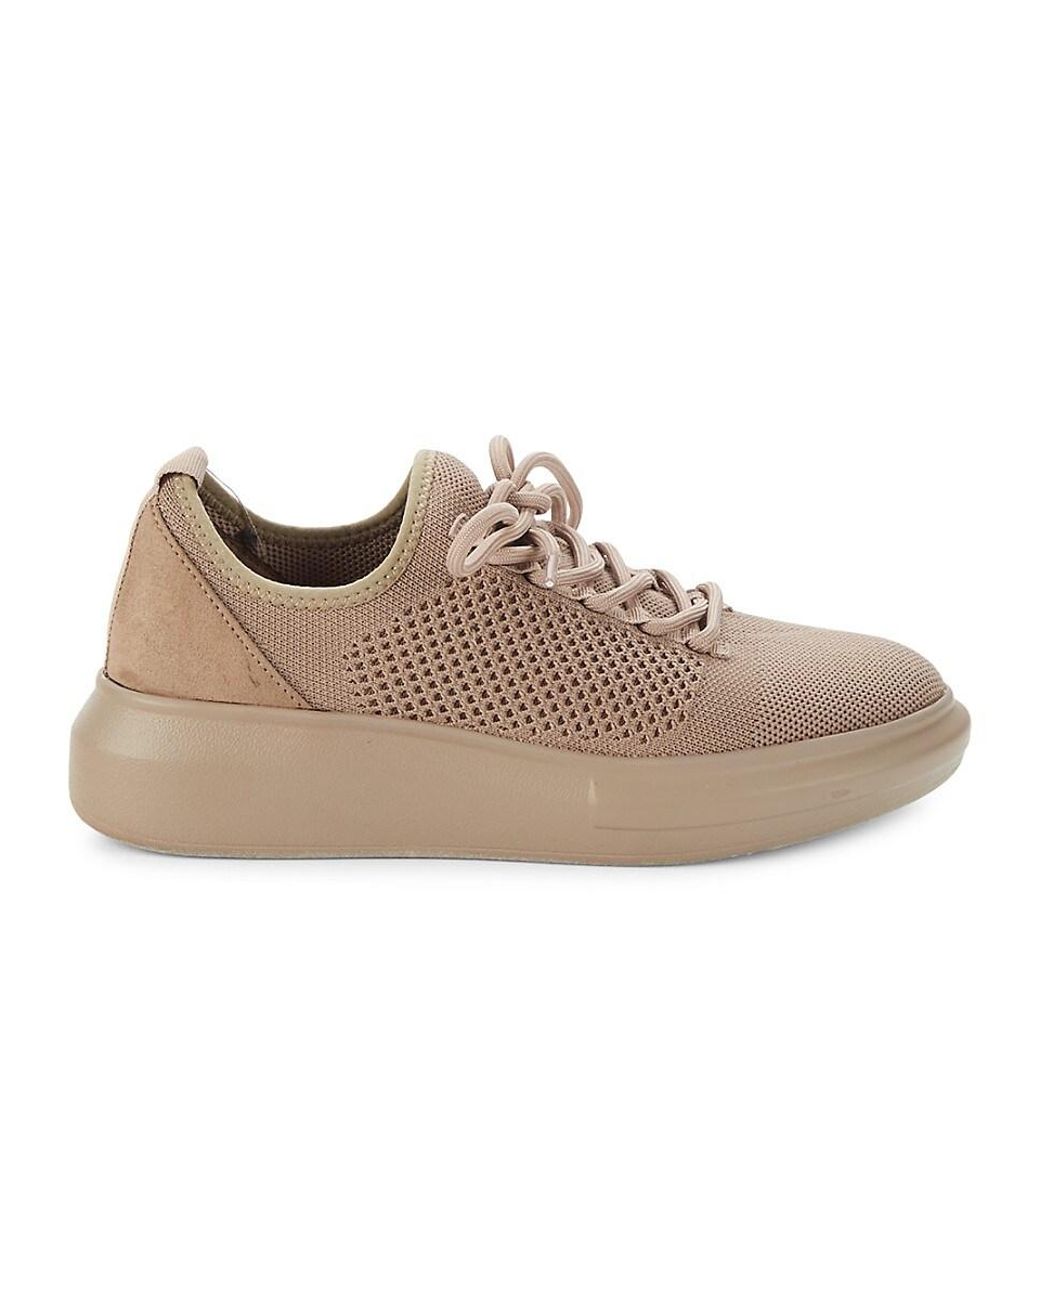 Anne Klein Giorgio Knit Sneakers in Natural | Lyst